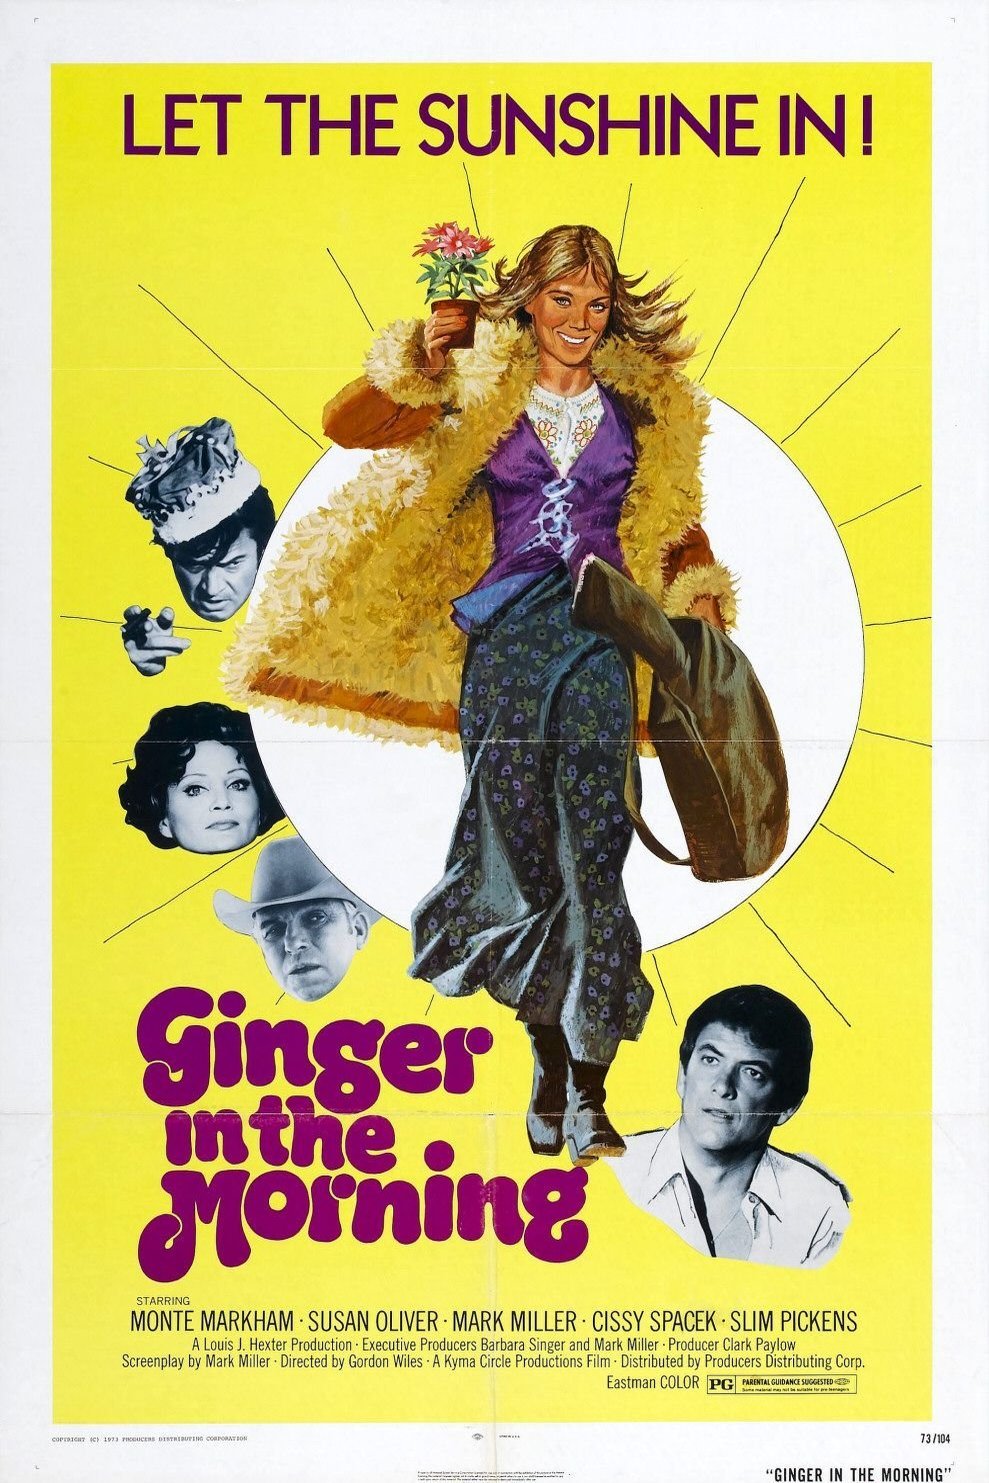 Poster of the movie Ginger in the Morning